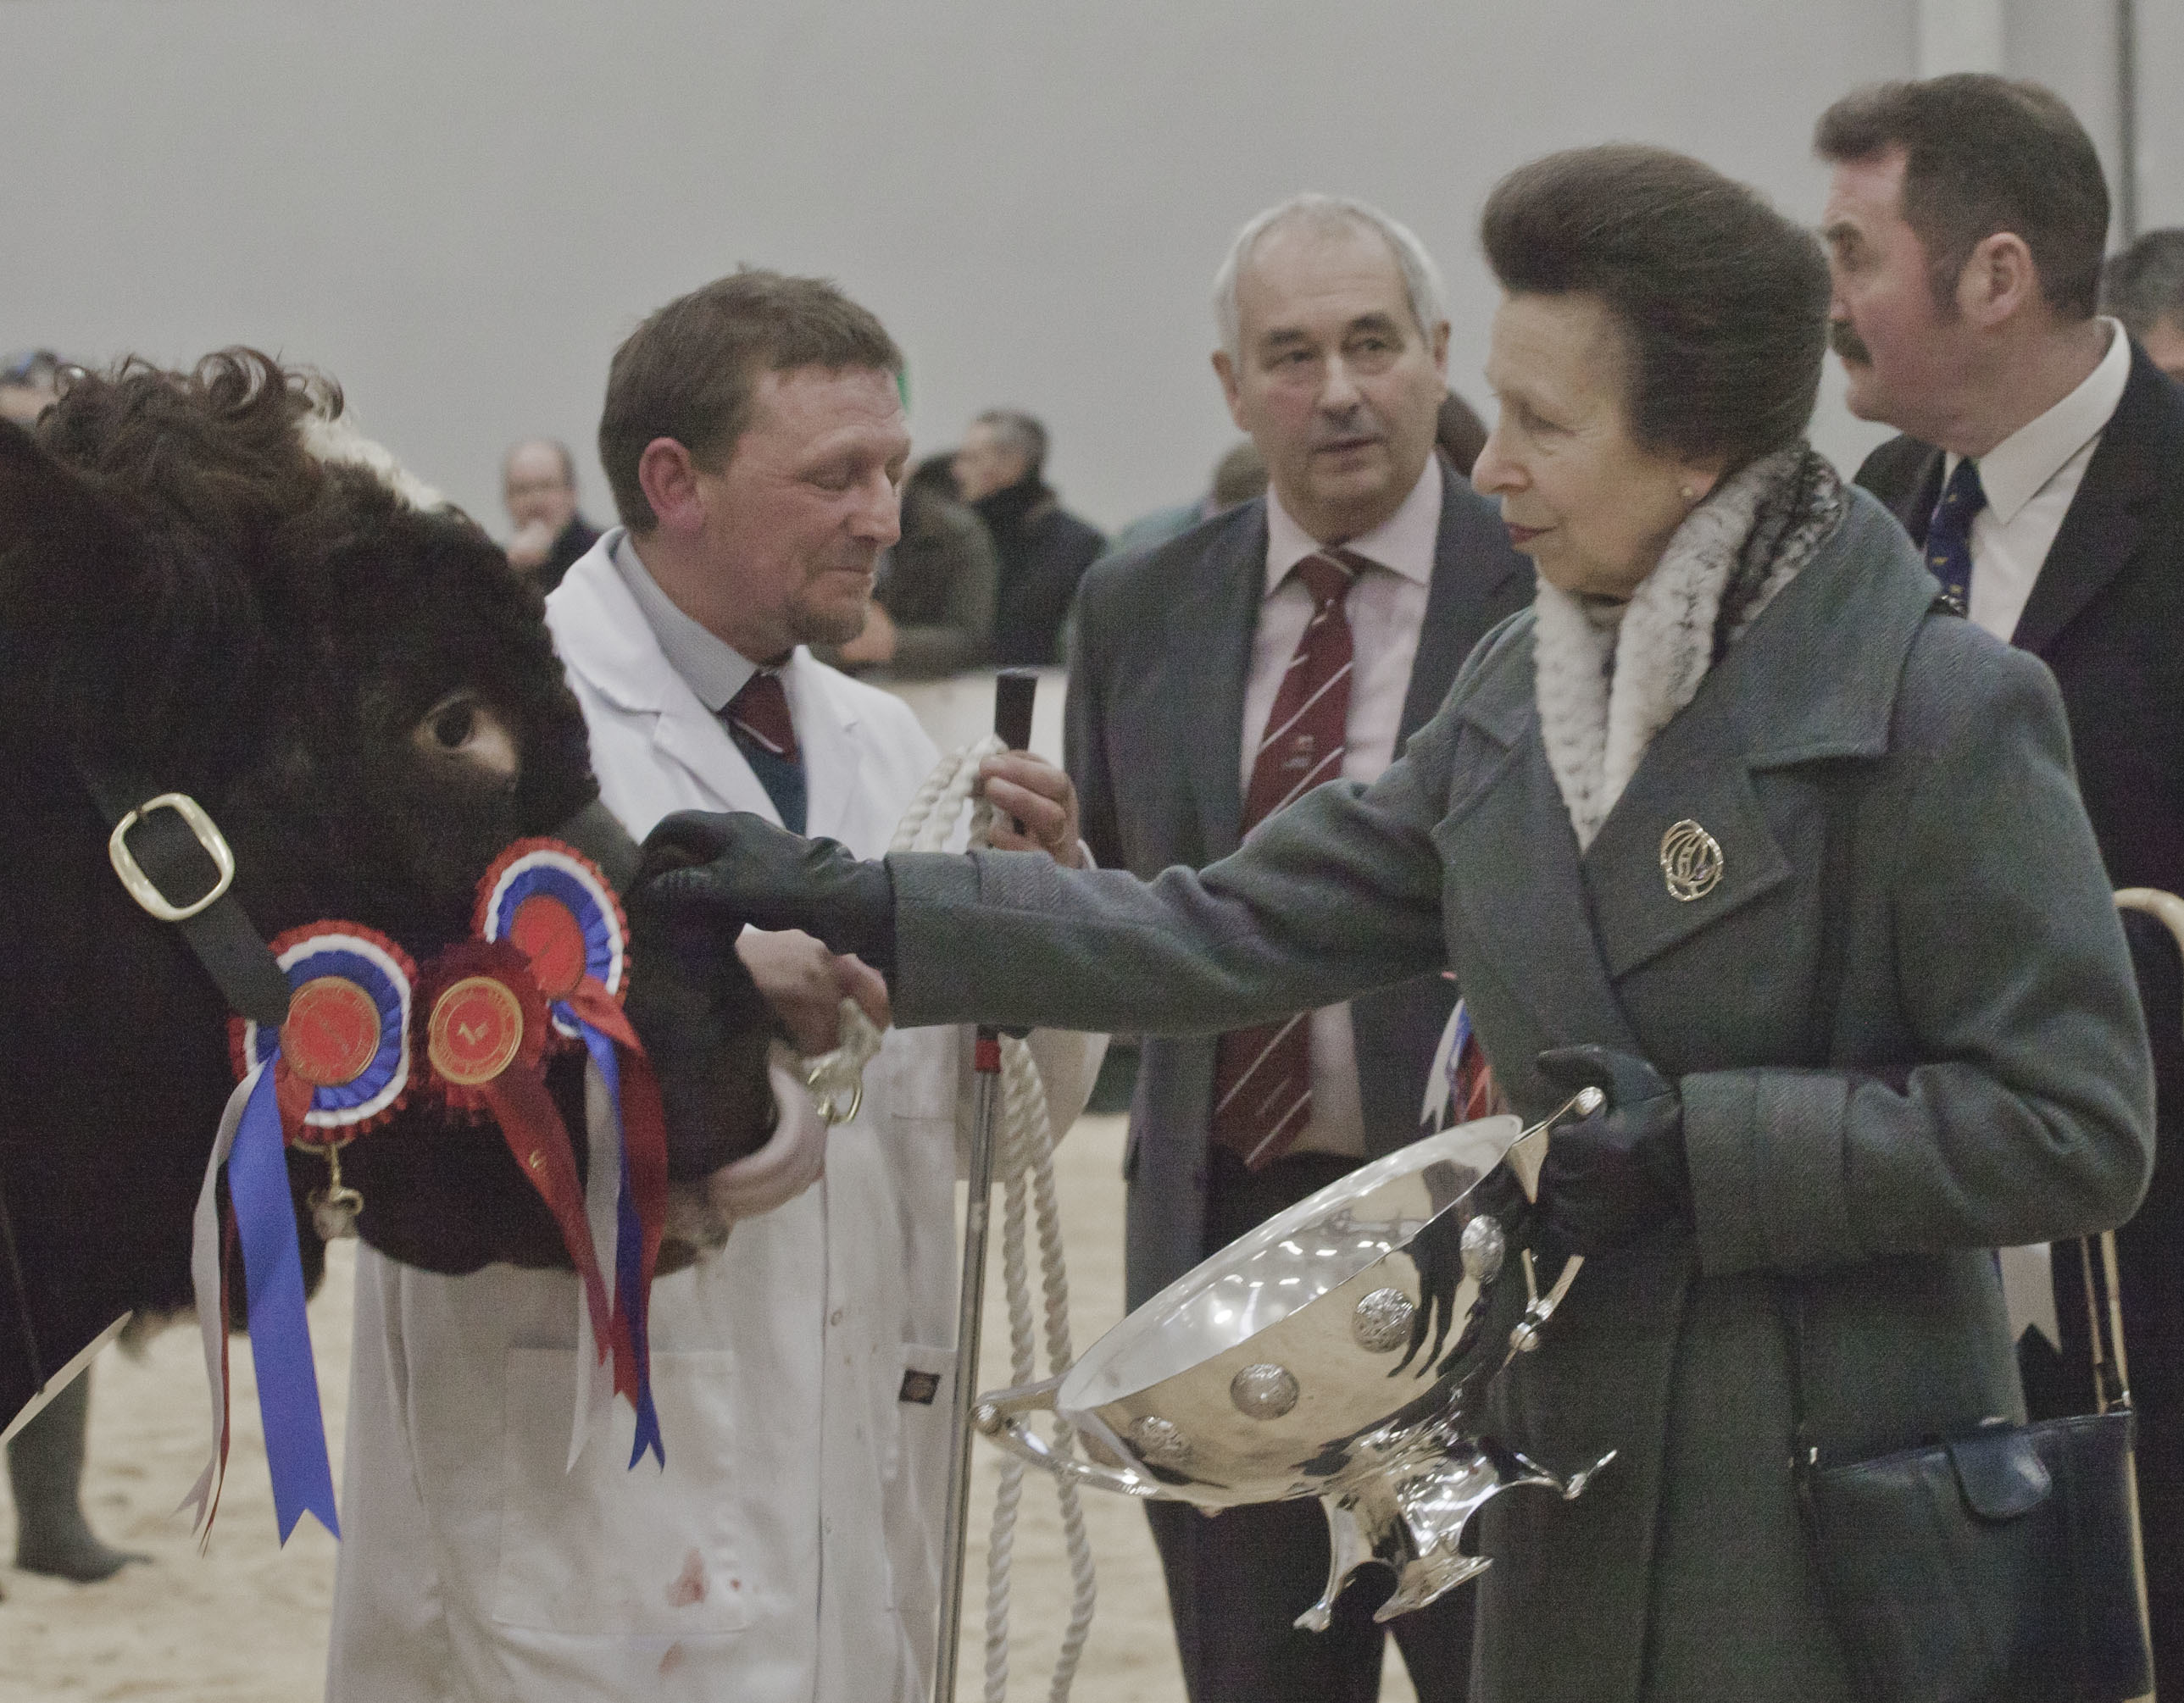 Princess Anne views the overall Shorthorn champion shown by Mike Clark.